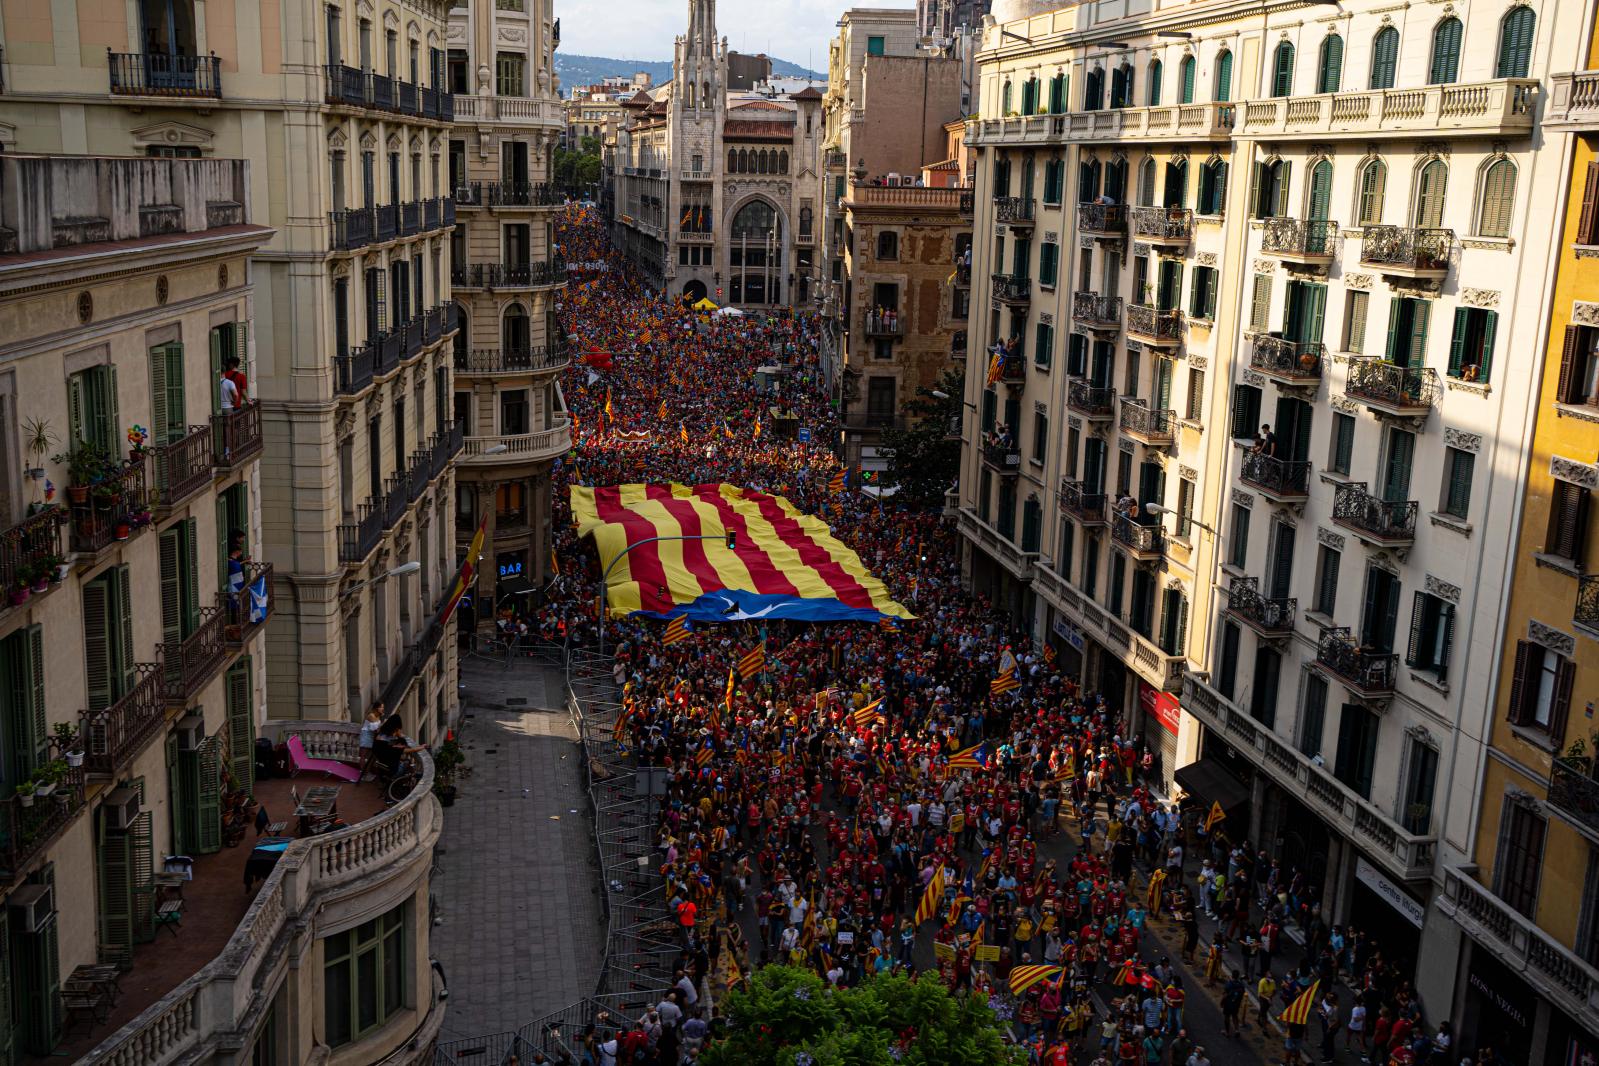 Image from Daily News - Thousands of Catalans rally for independence in Barcelona...